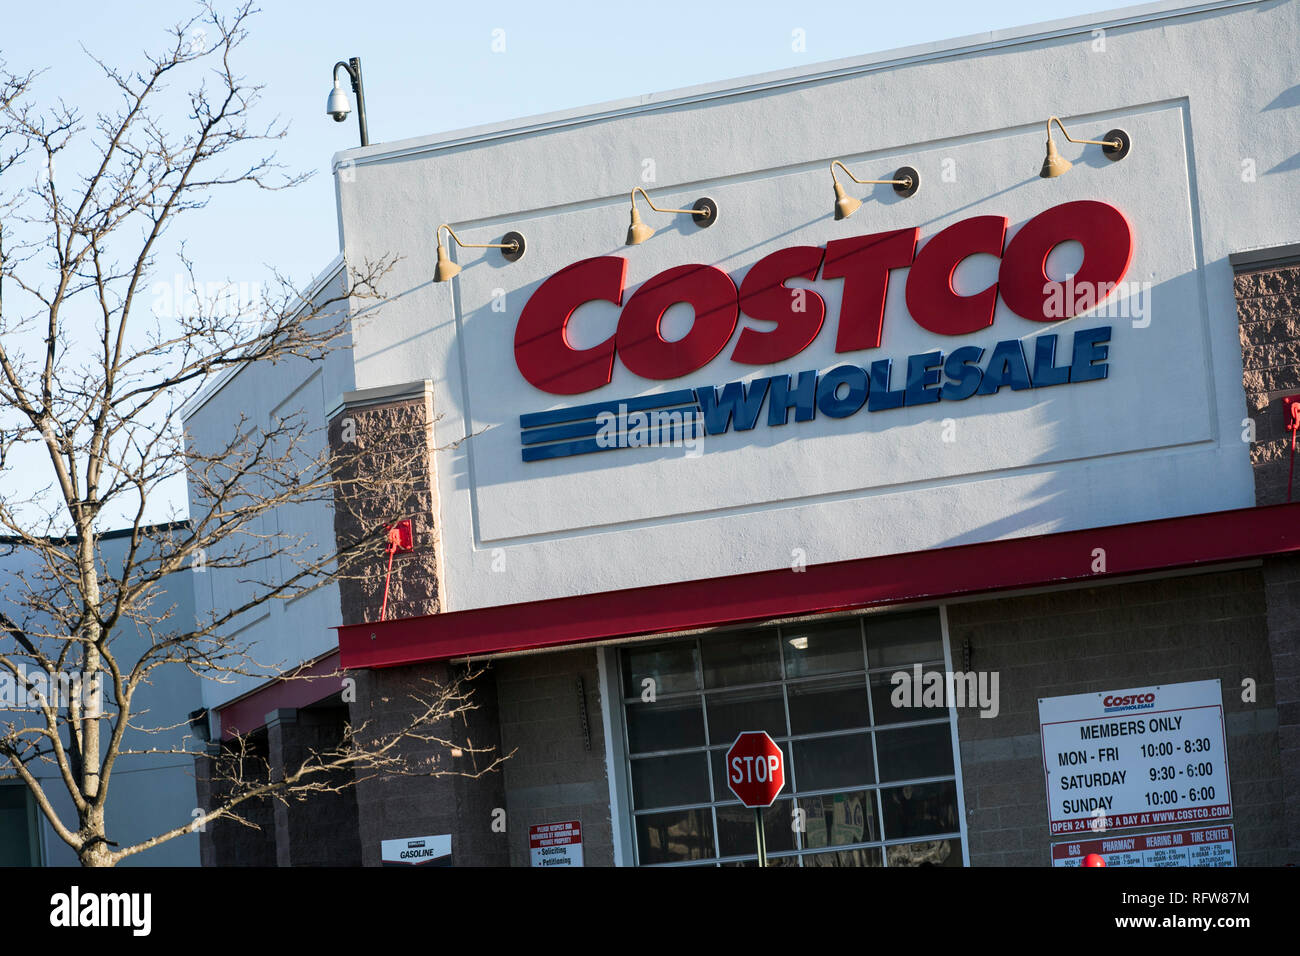 A logo sign outside of a Costco Wholesale warehouse store in Woodbridge, Virginia, on January 21, 2019. Stock Photo